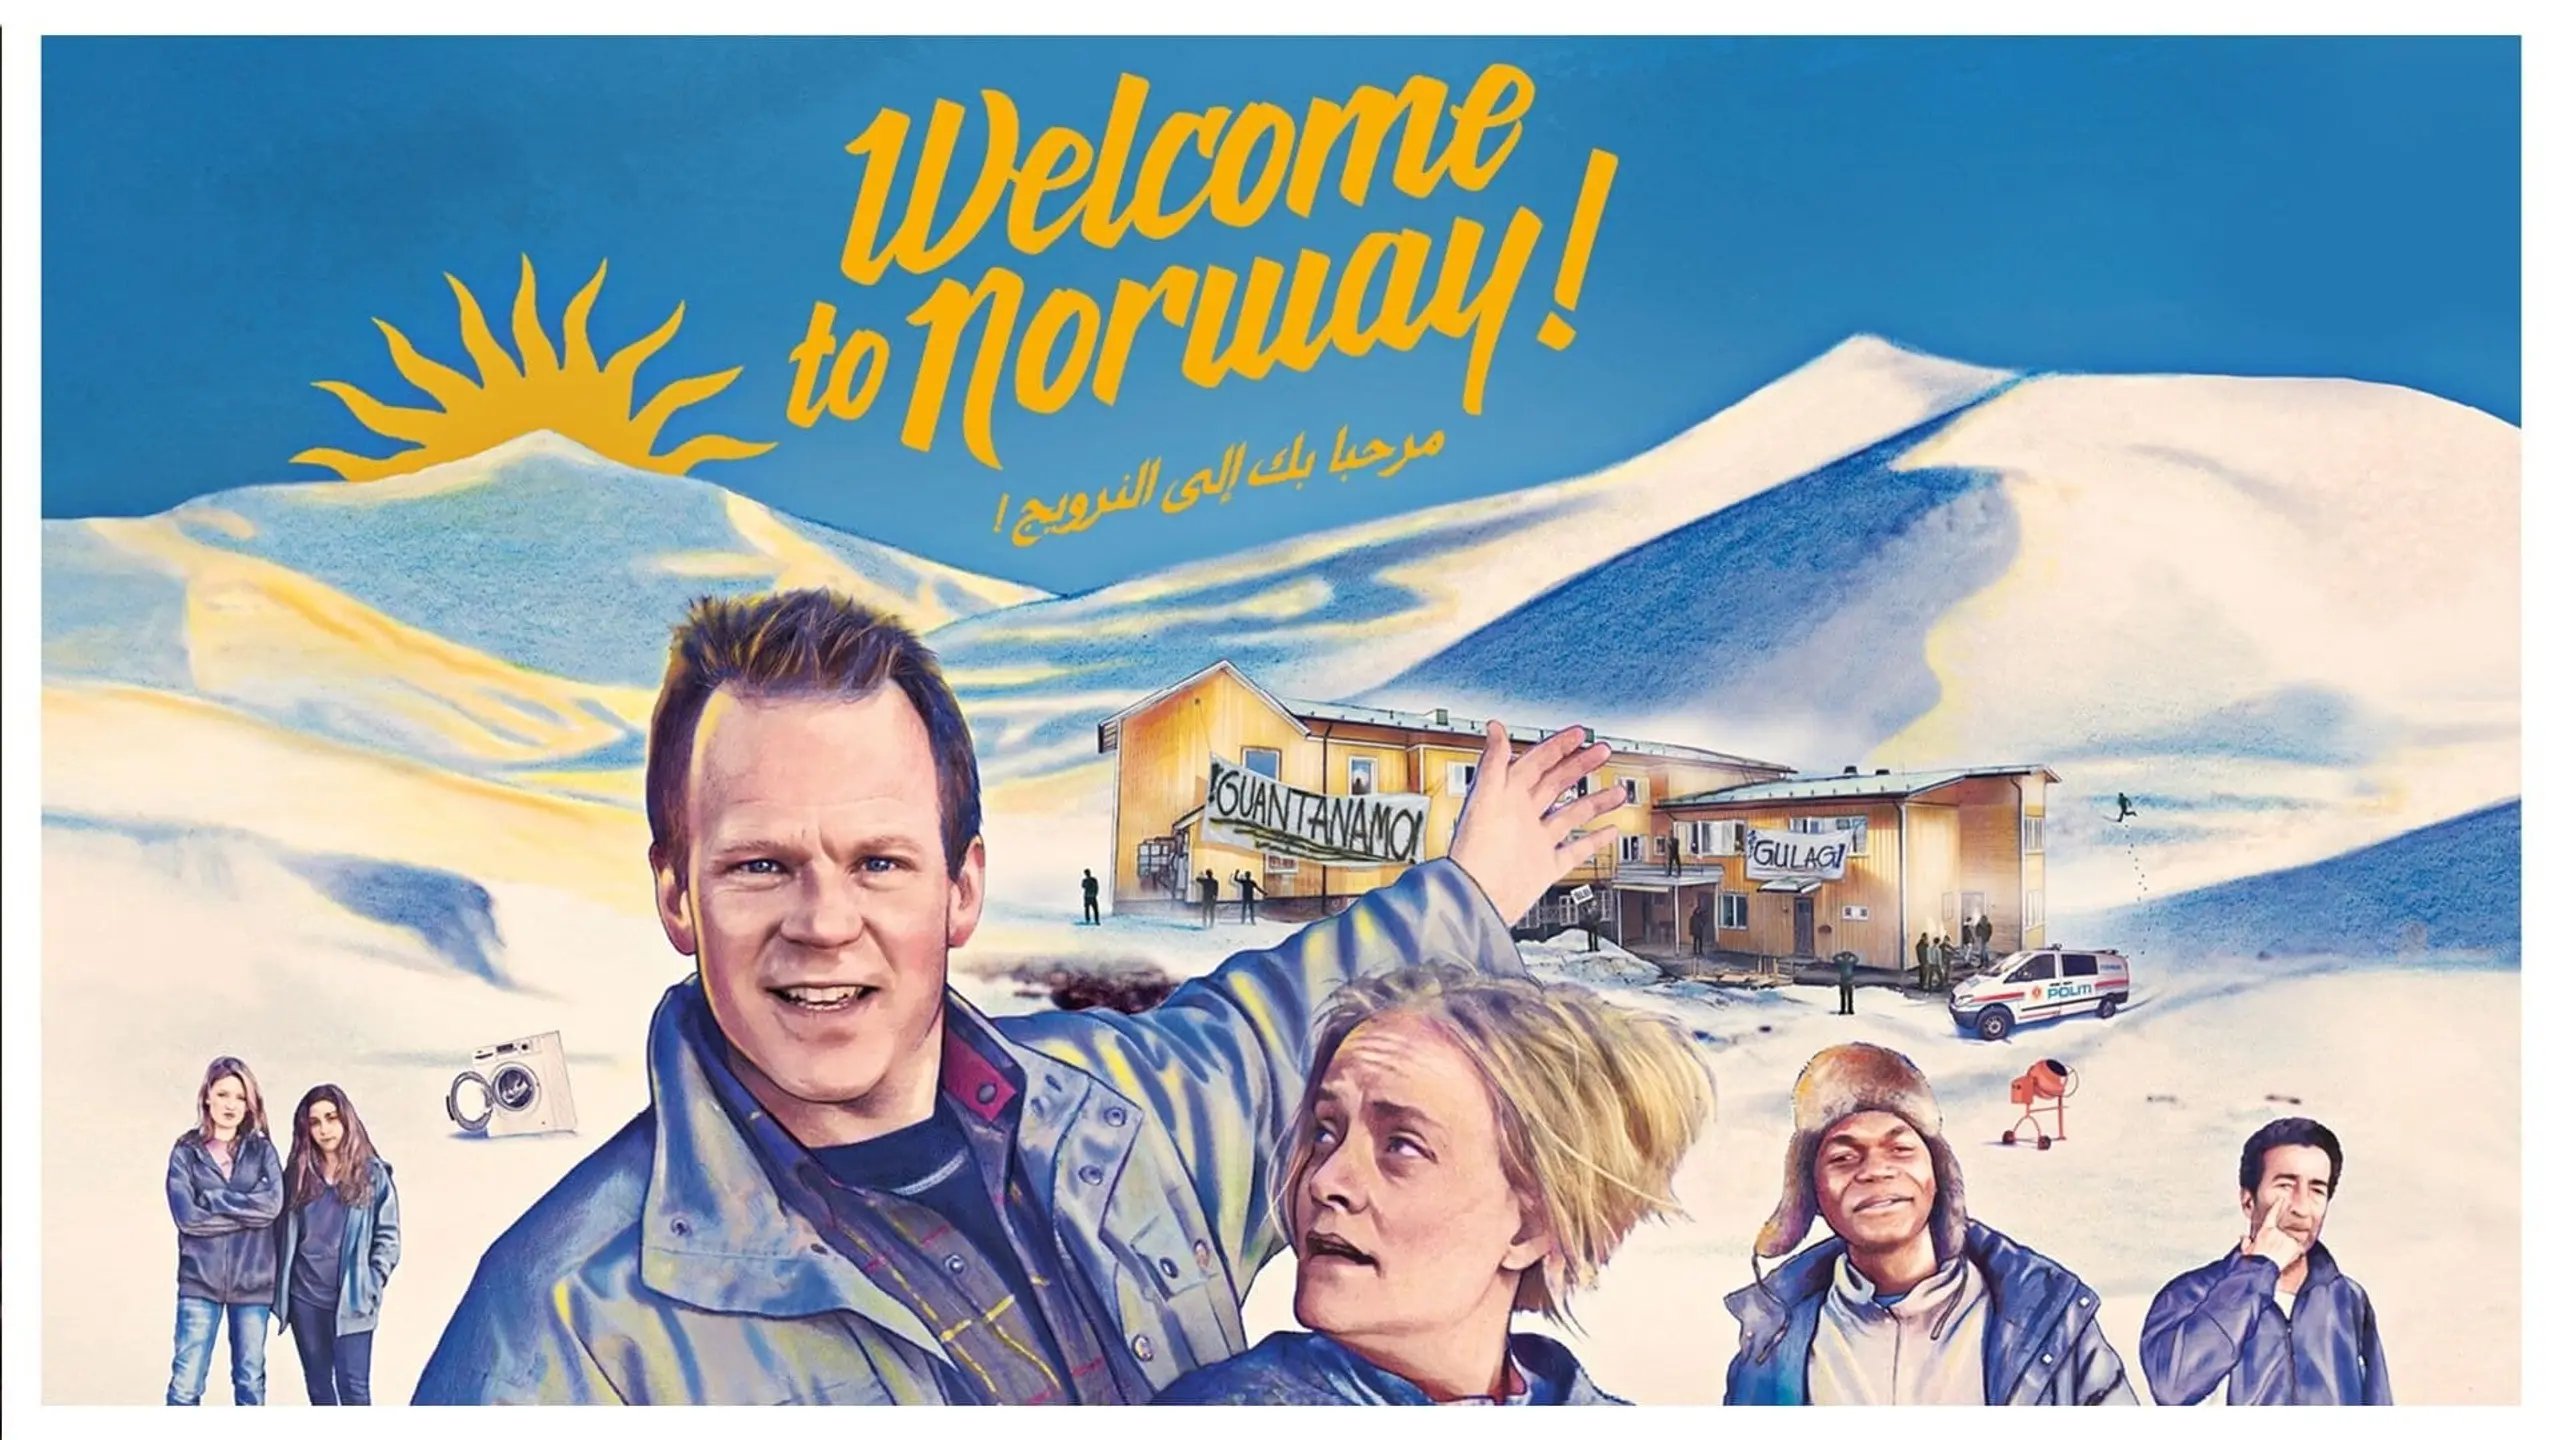 Welcome to Norway!